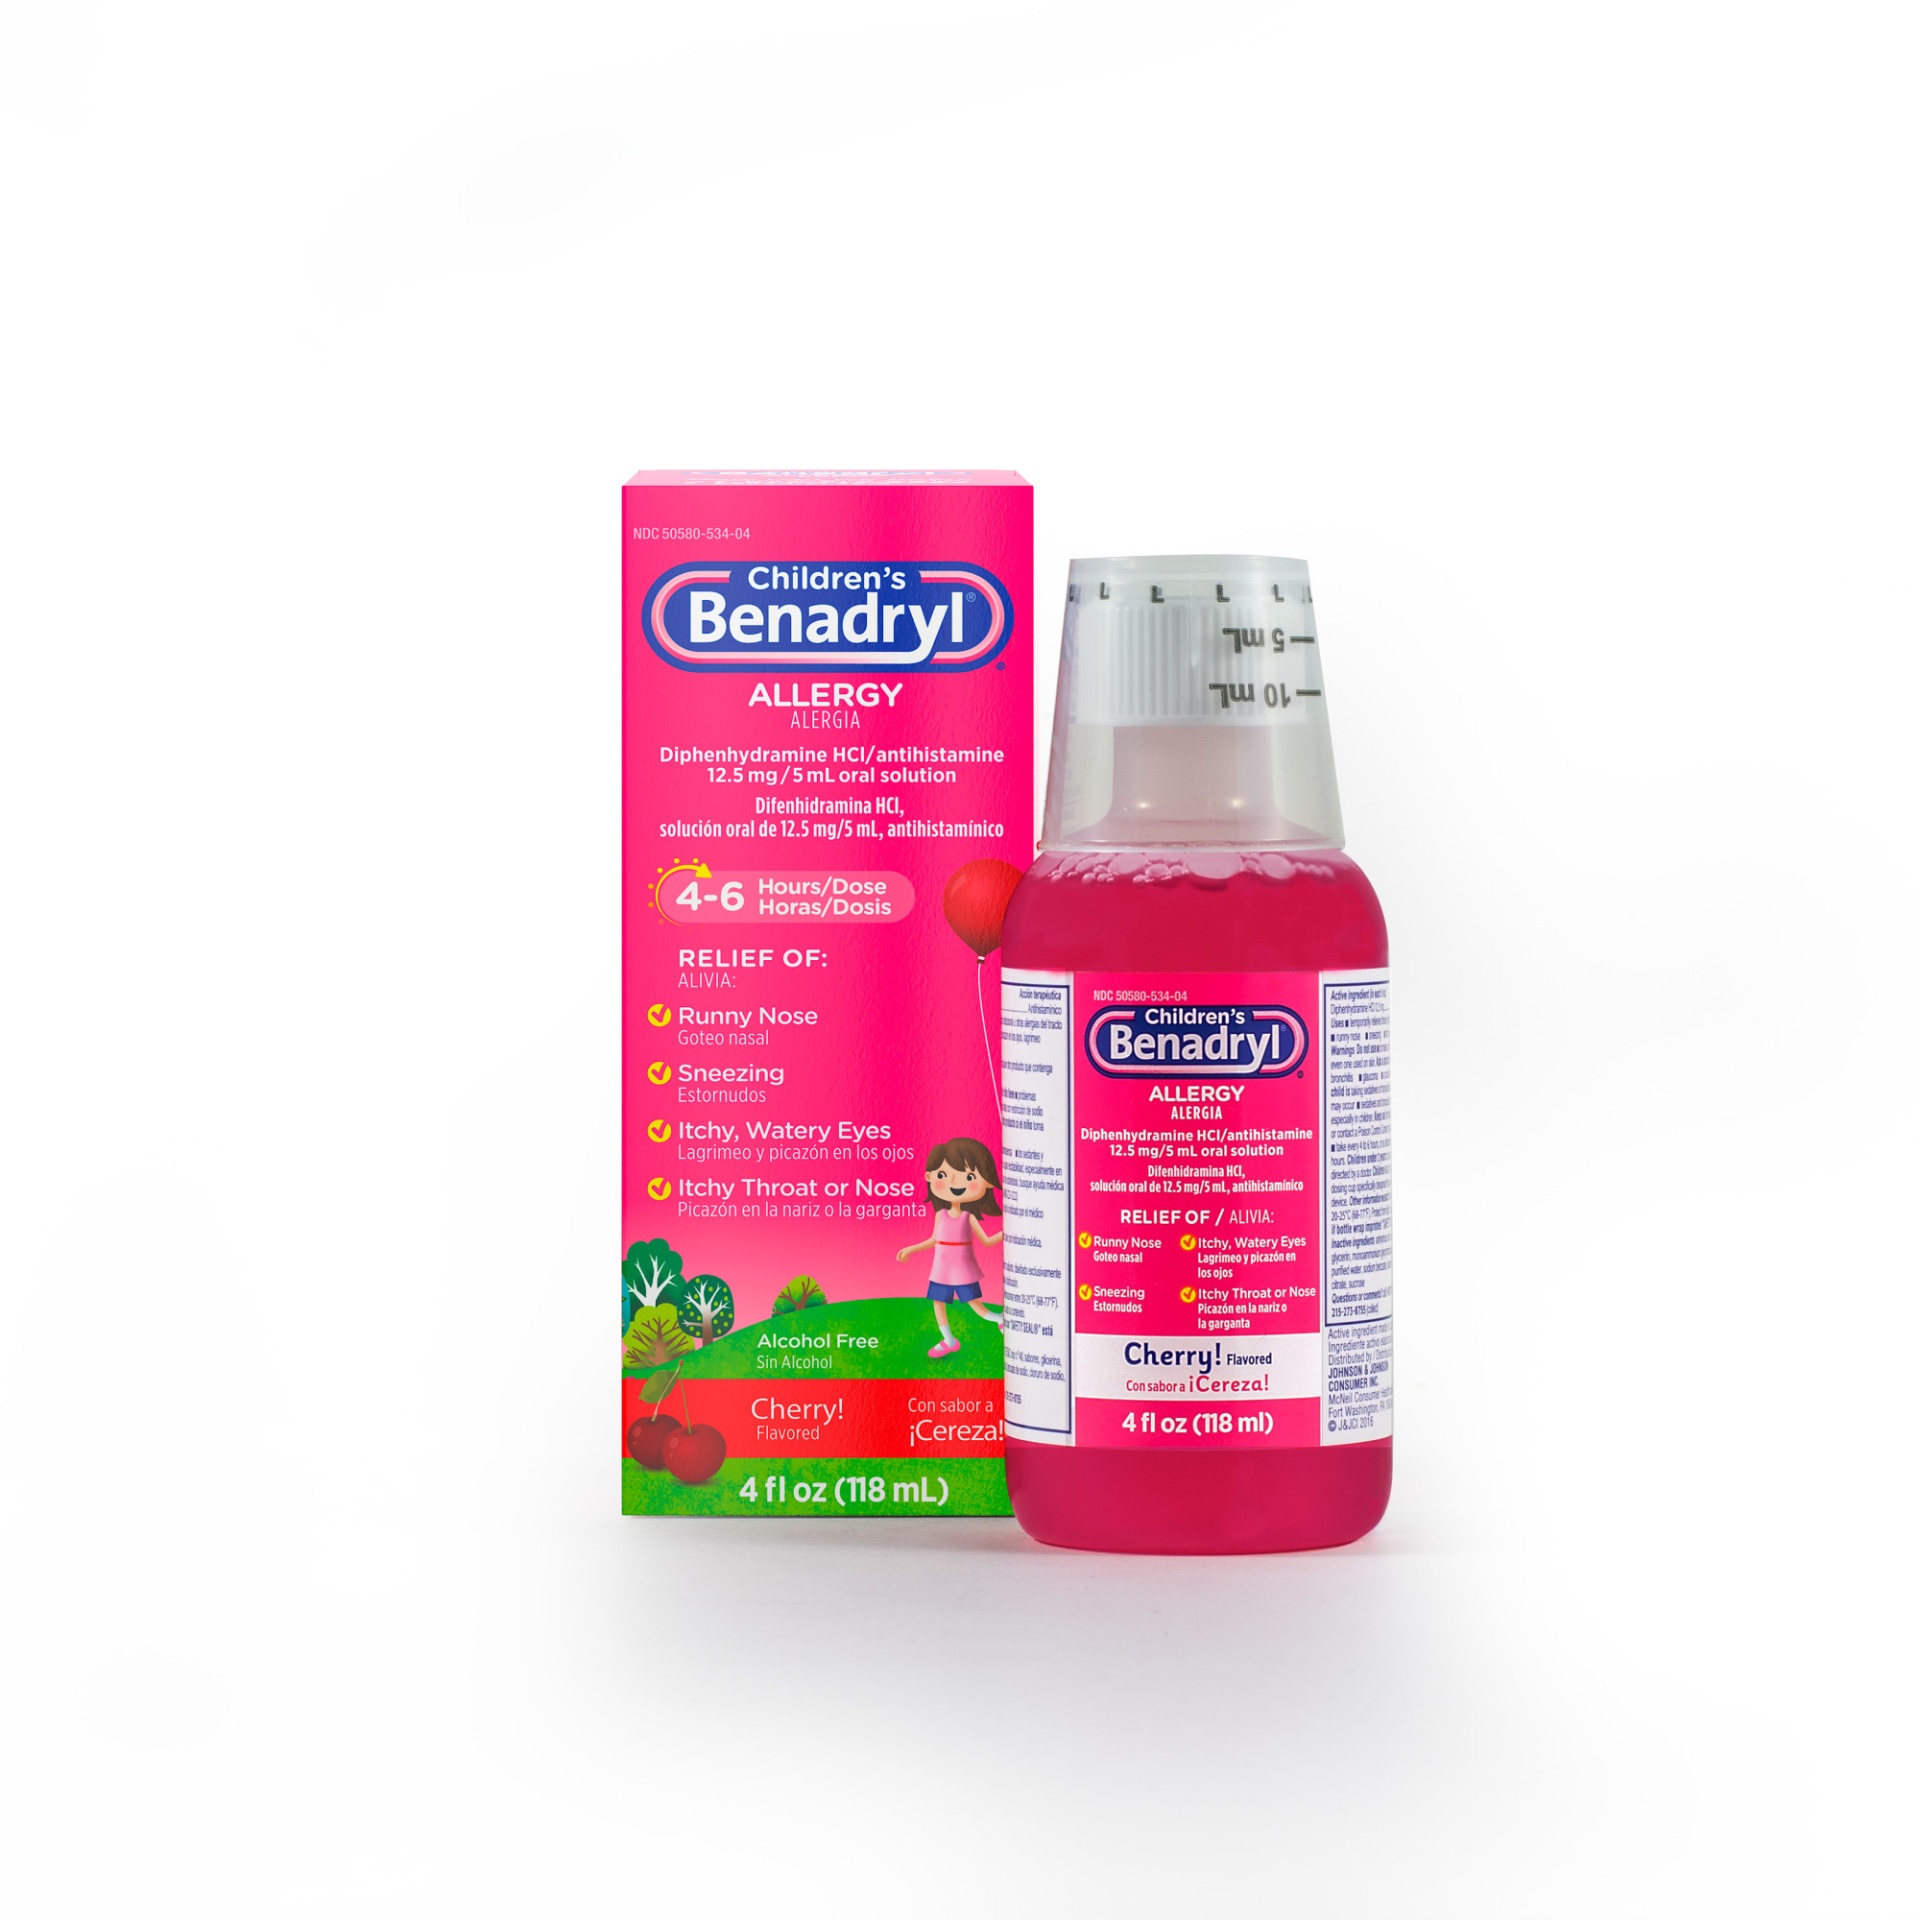 slide 1 of 5, Children's Benadryl Allergy Relief Liquid Medicine with Diphenhydramine HCl, Kids' Allergy Syrup for Allergy Symptoms Like Runny Nose, Itchy Eyes & More, Cherry Flavor, 4 fl oz